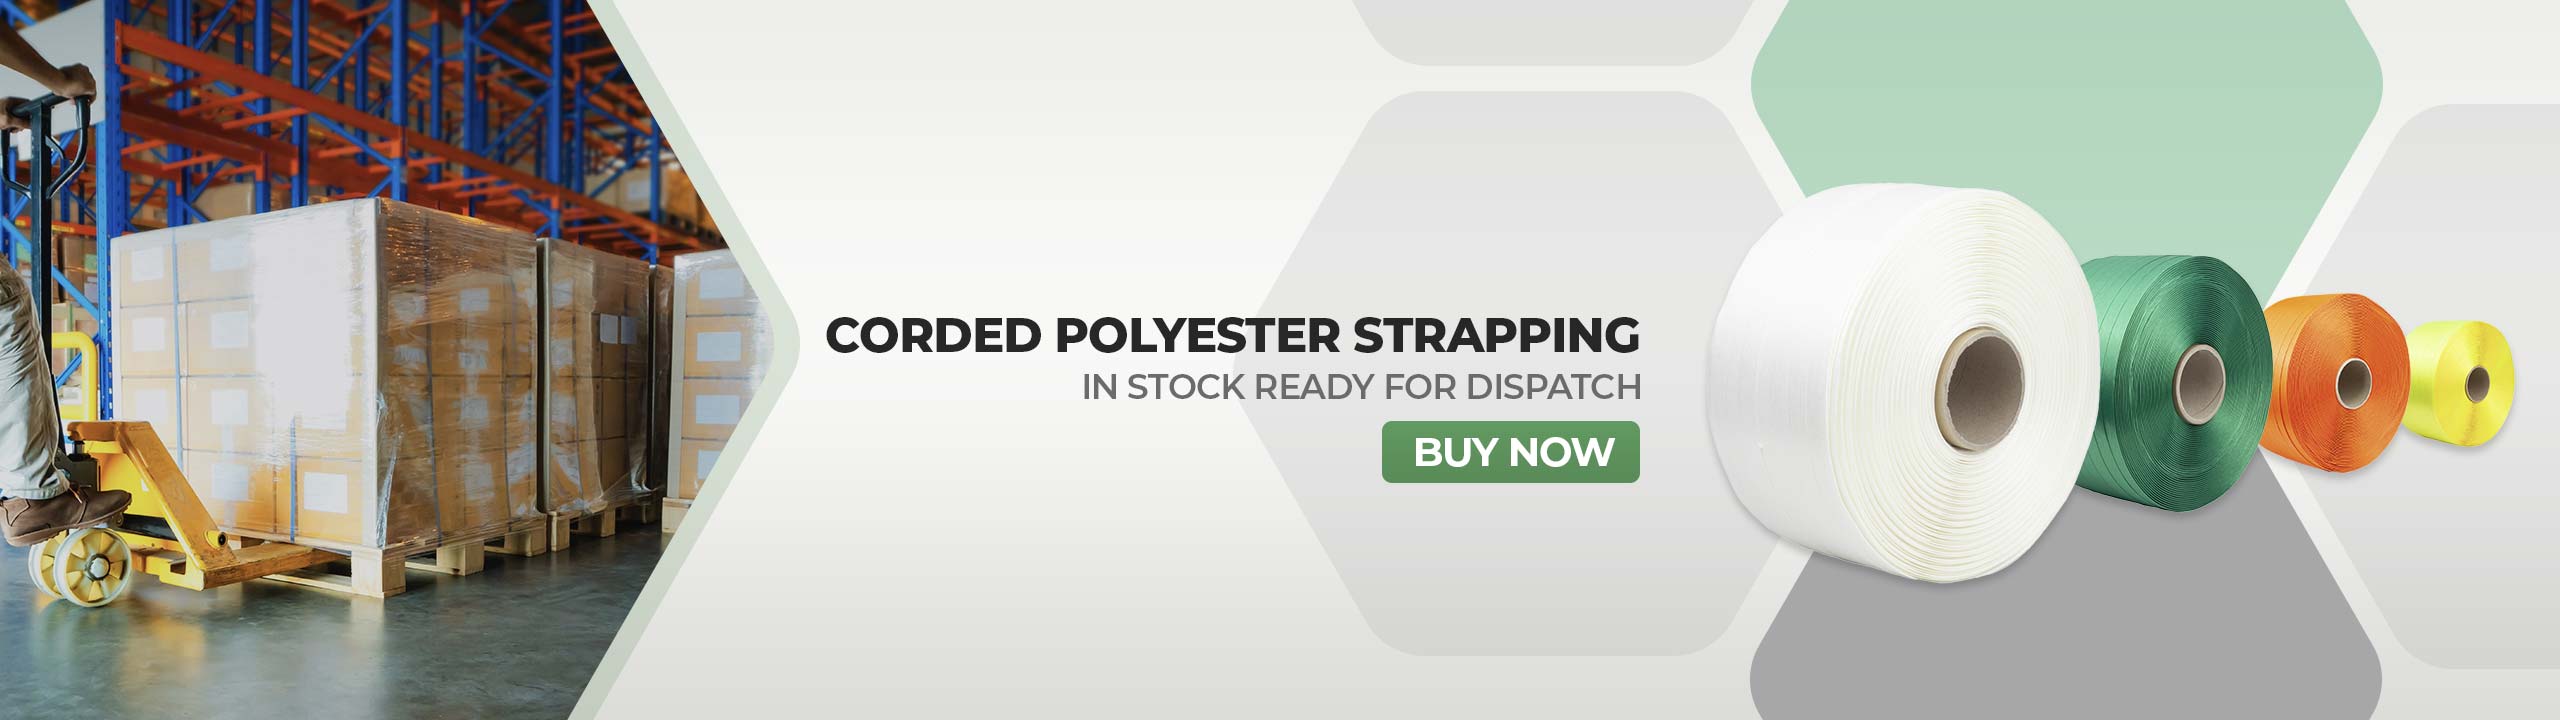 /corded-polyester-strapping